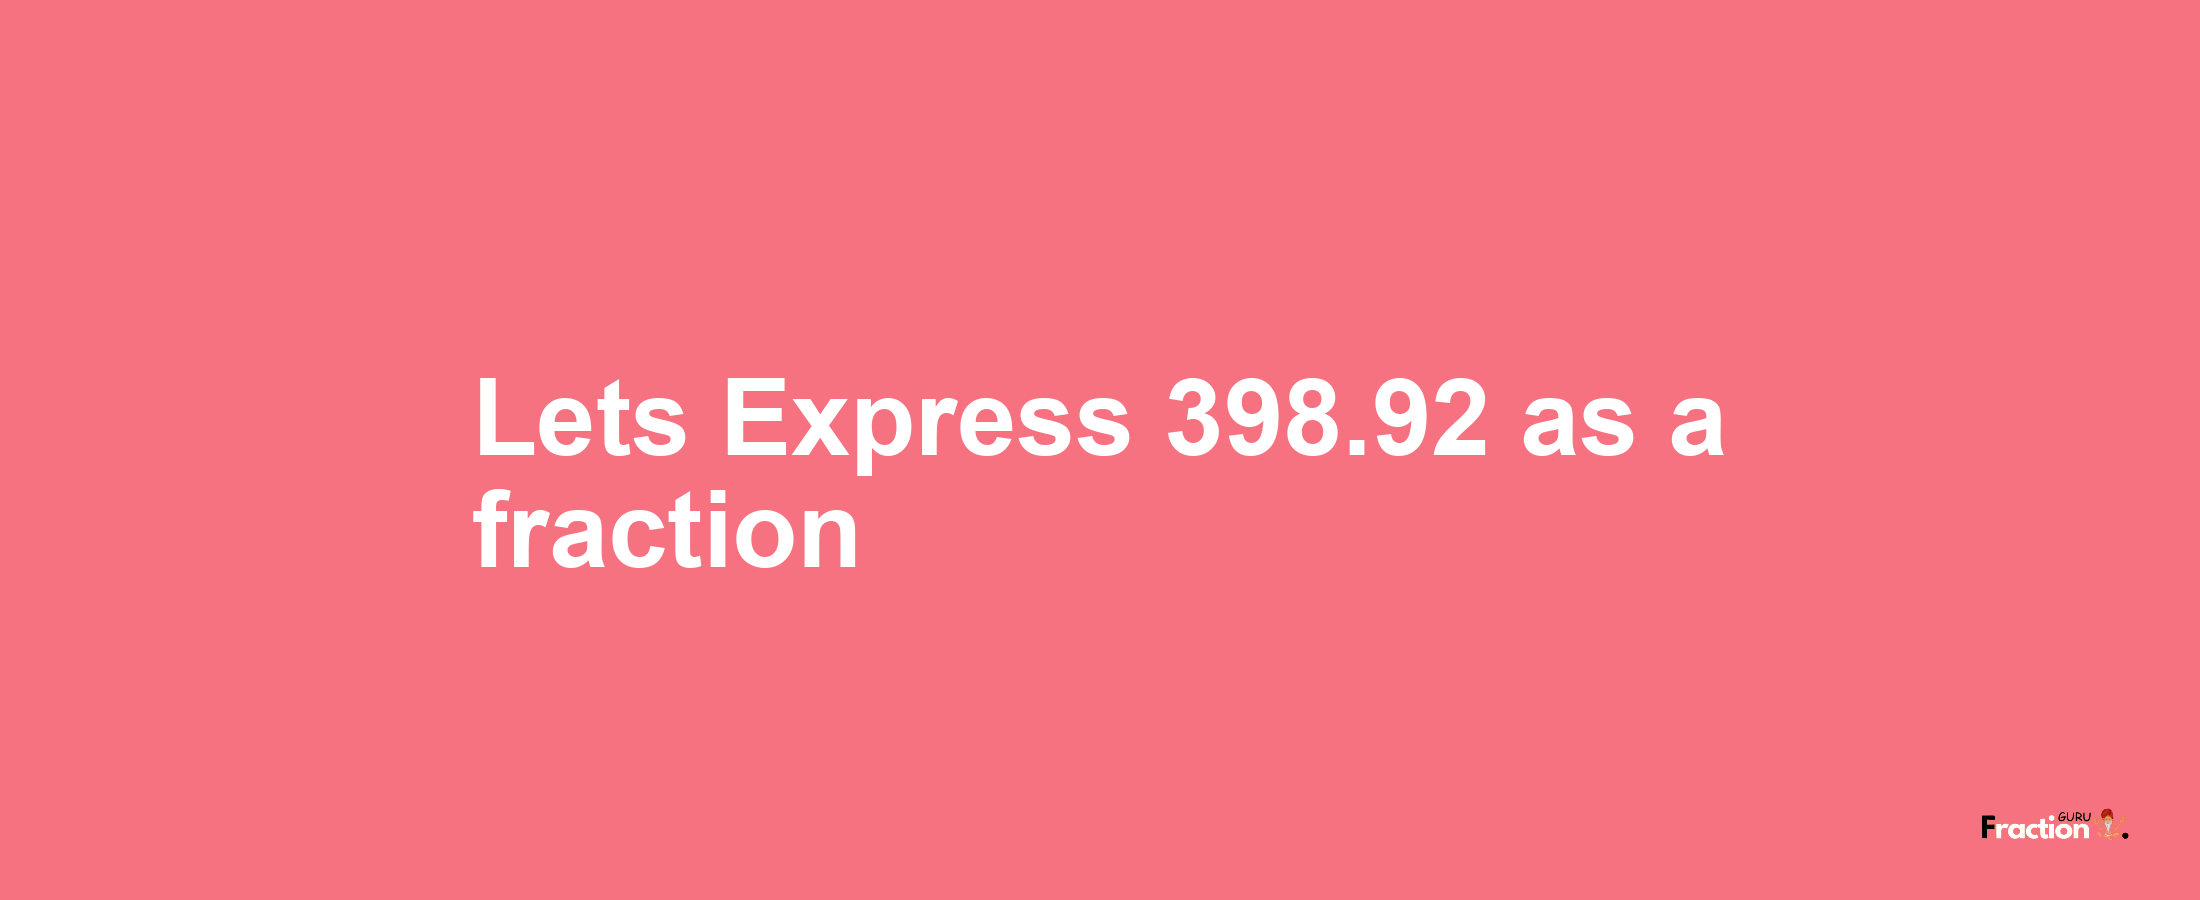 Lets Express 398.92 as afraction